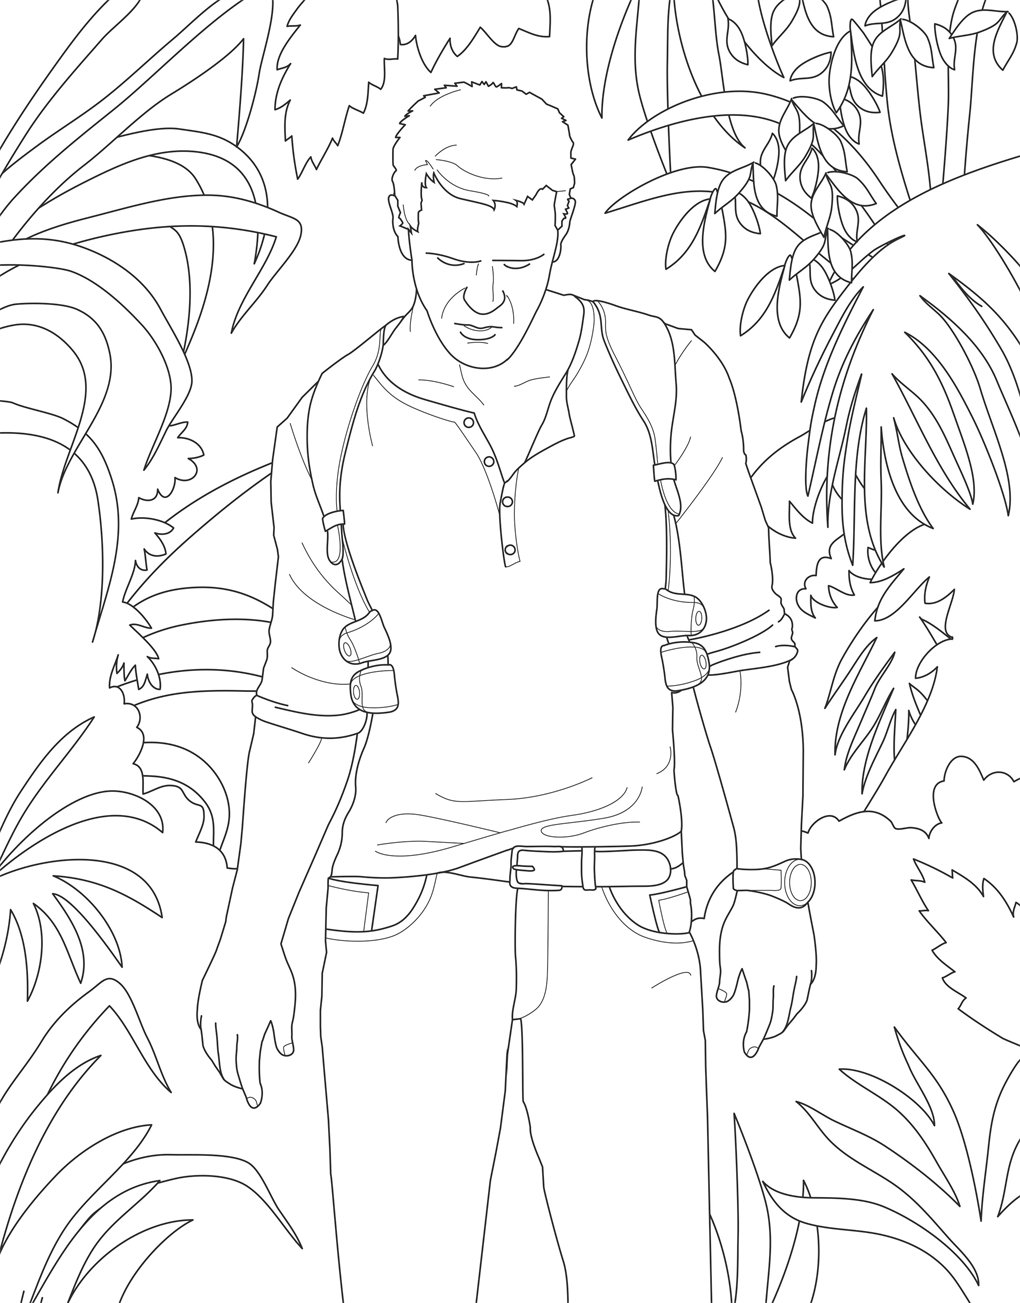 Art for the Players: The official colouring book from PlayStation ...